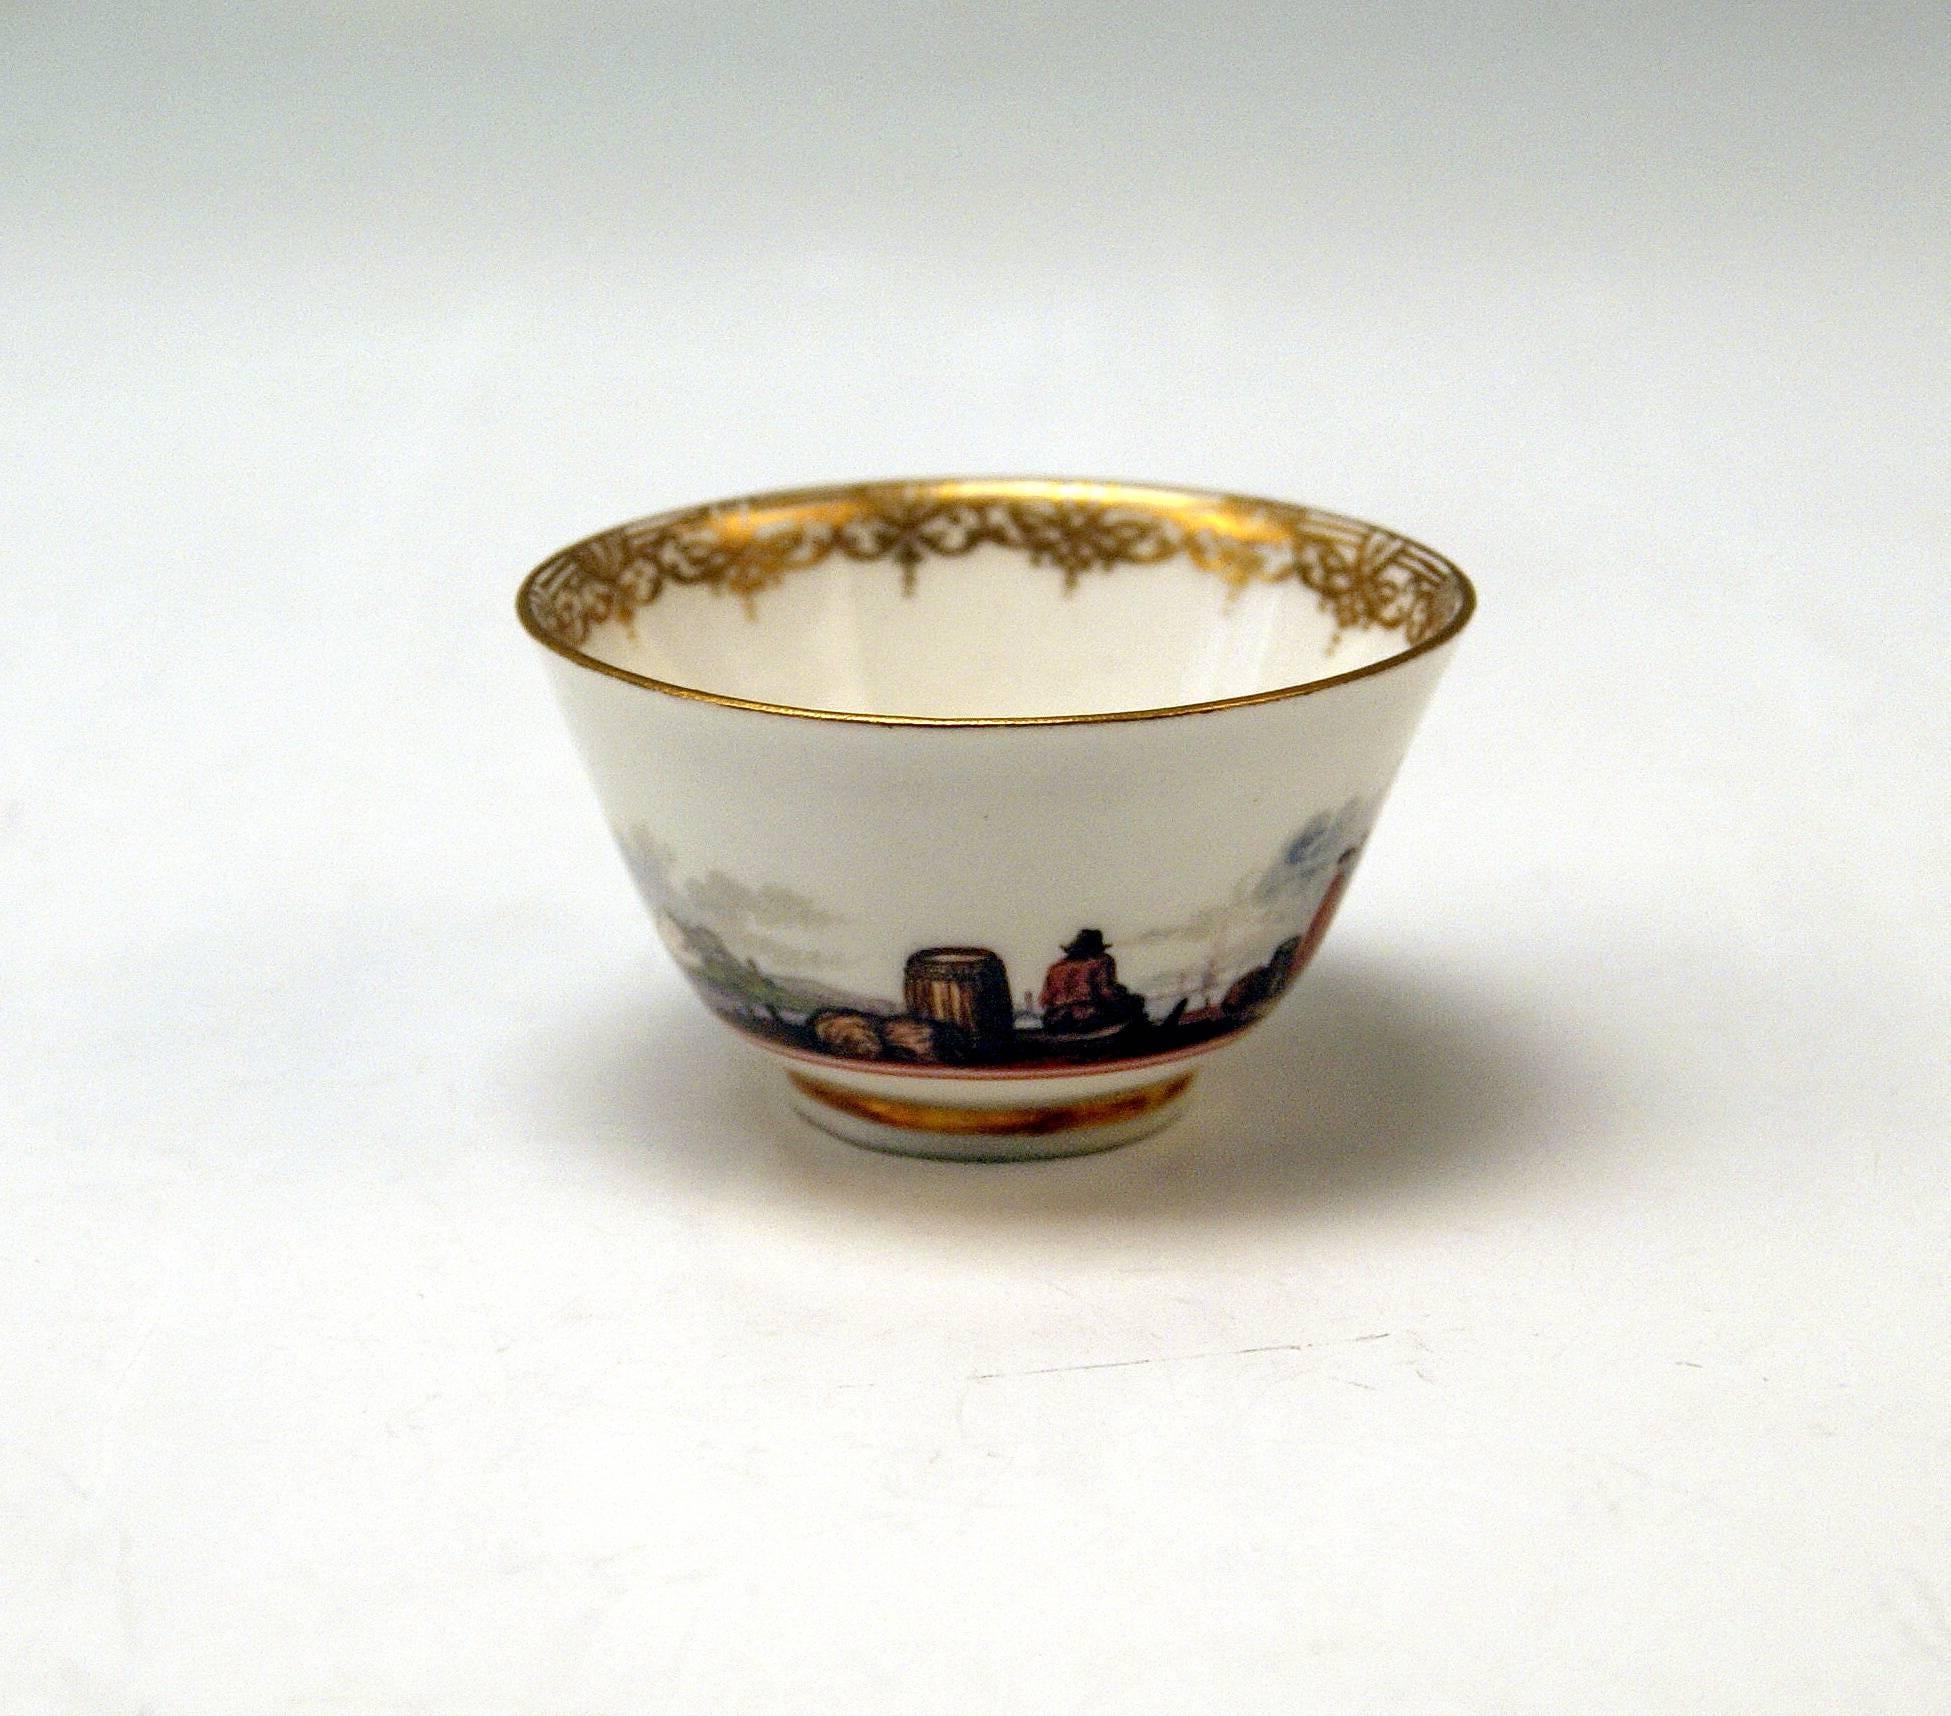 Porcelain Meissen Small Painted Cup and Saucer Baroque Period Vintage B, circa 1735-1740